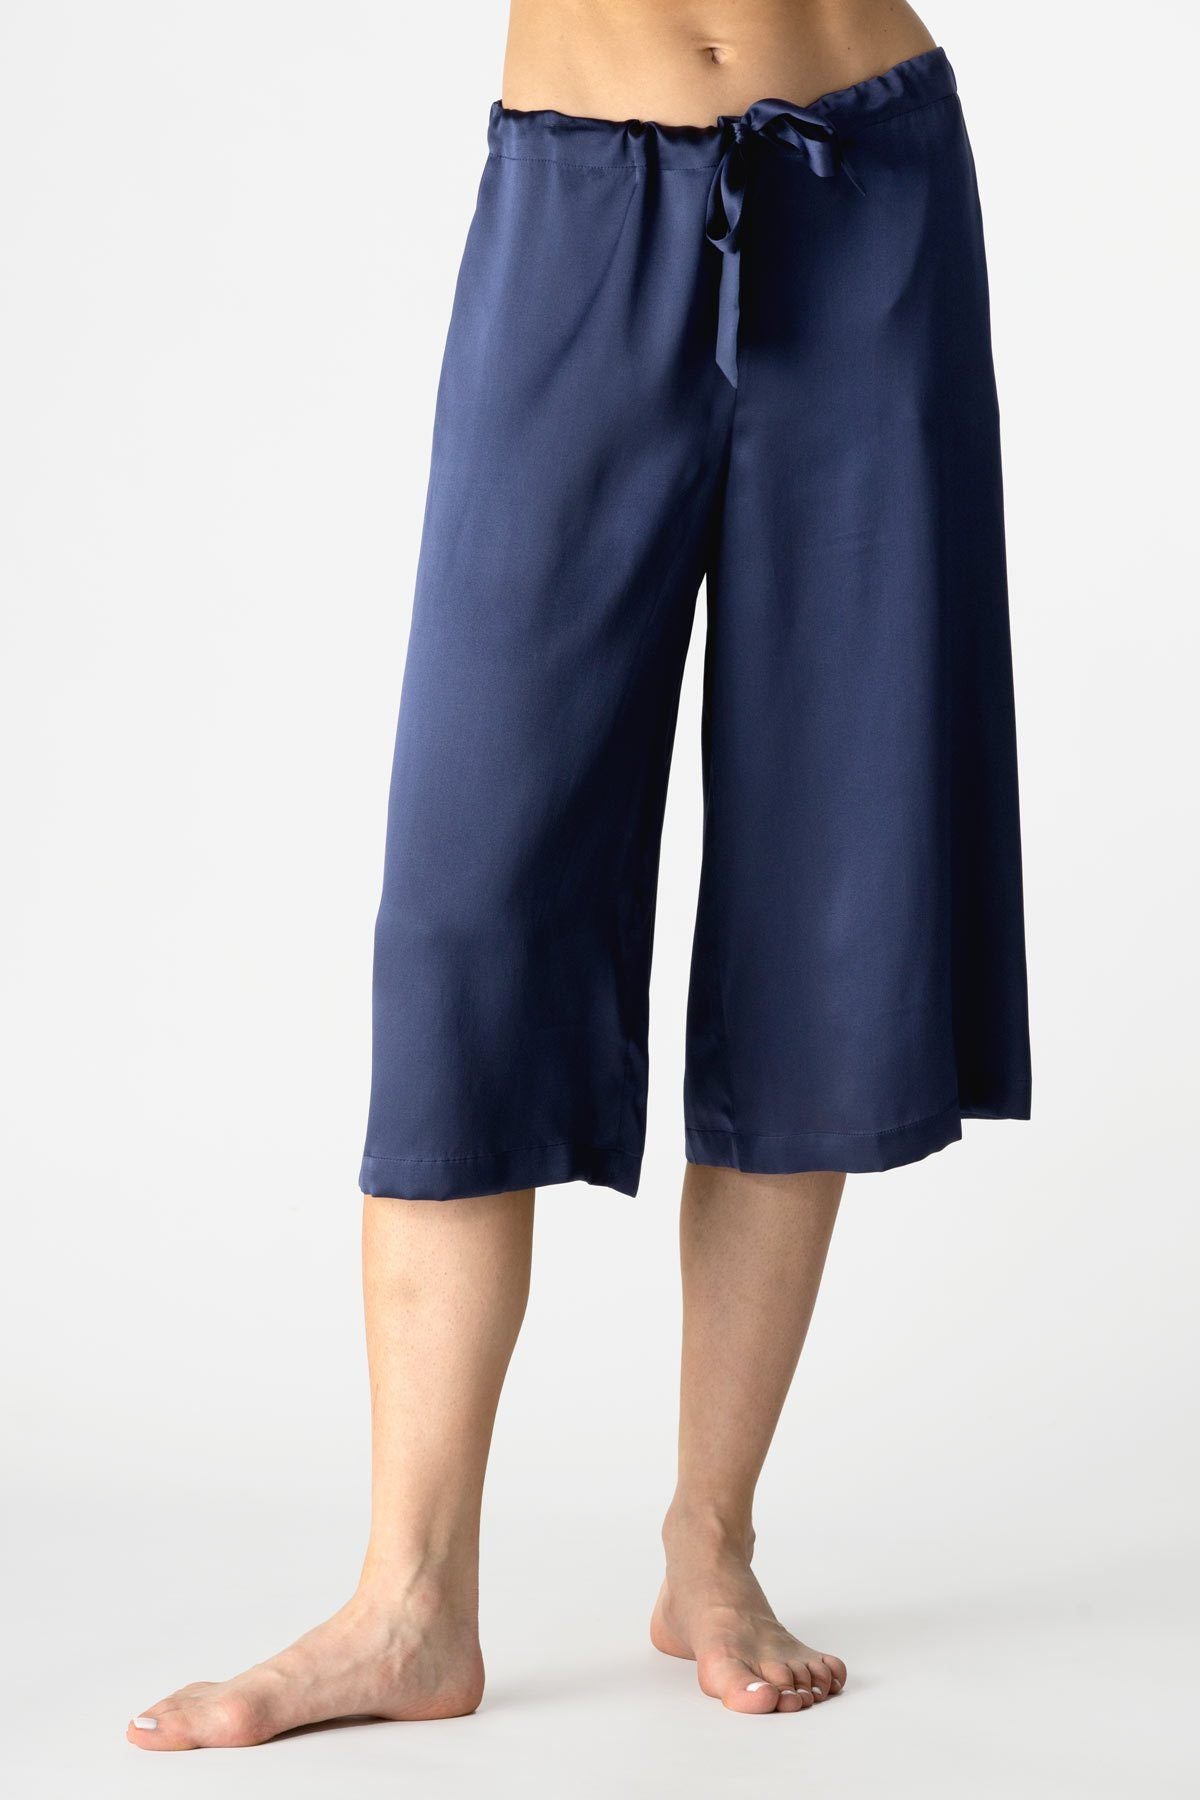 Dylan Urbane Silk Culottes Lounge Trouser NK iMODE midnight-blue blue S